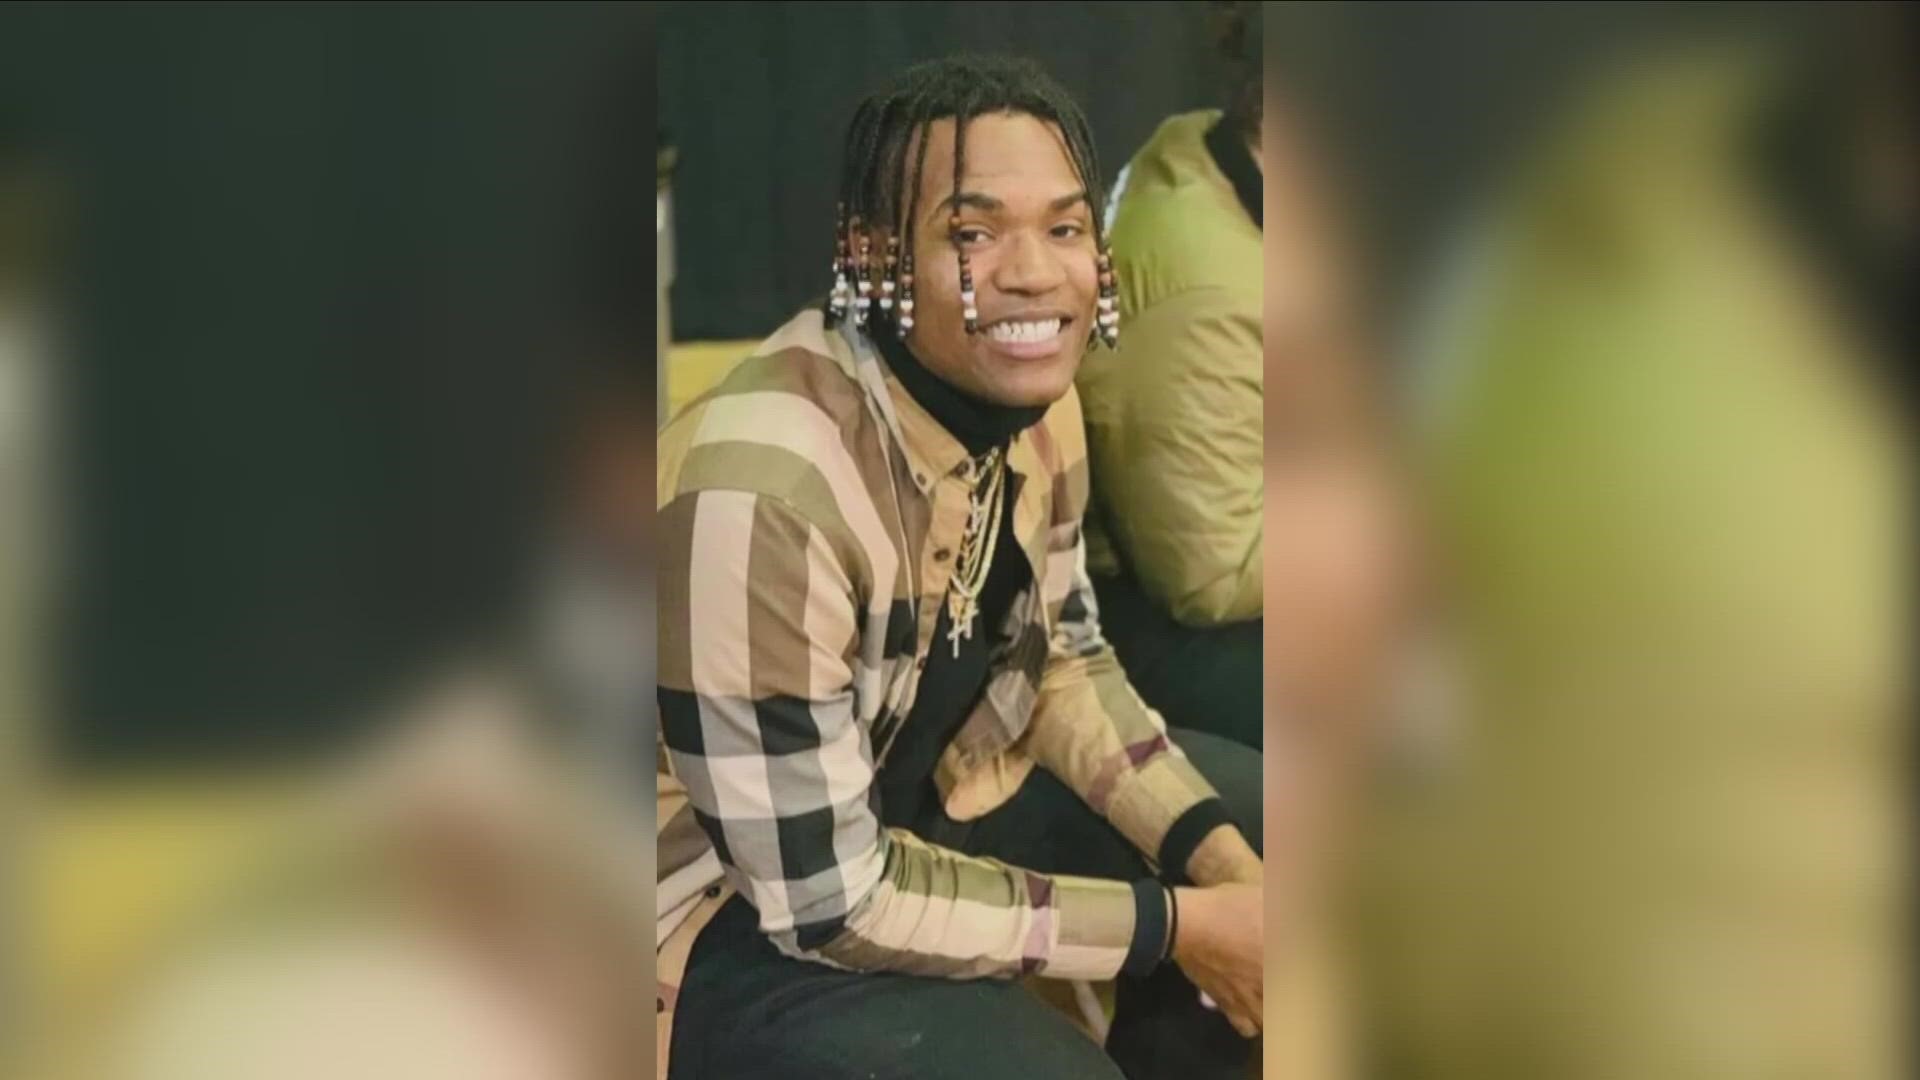 An anti-violence rally was held at Gluck Park in honor of Jaylan McWilson, calling for an end to gun violence. The 24-year-old was shot to death outside of his home.